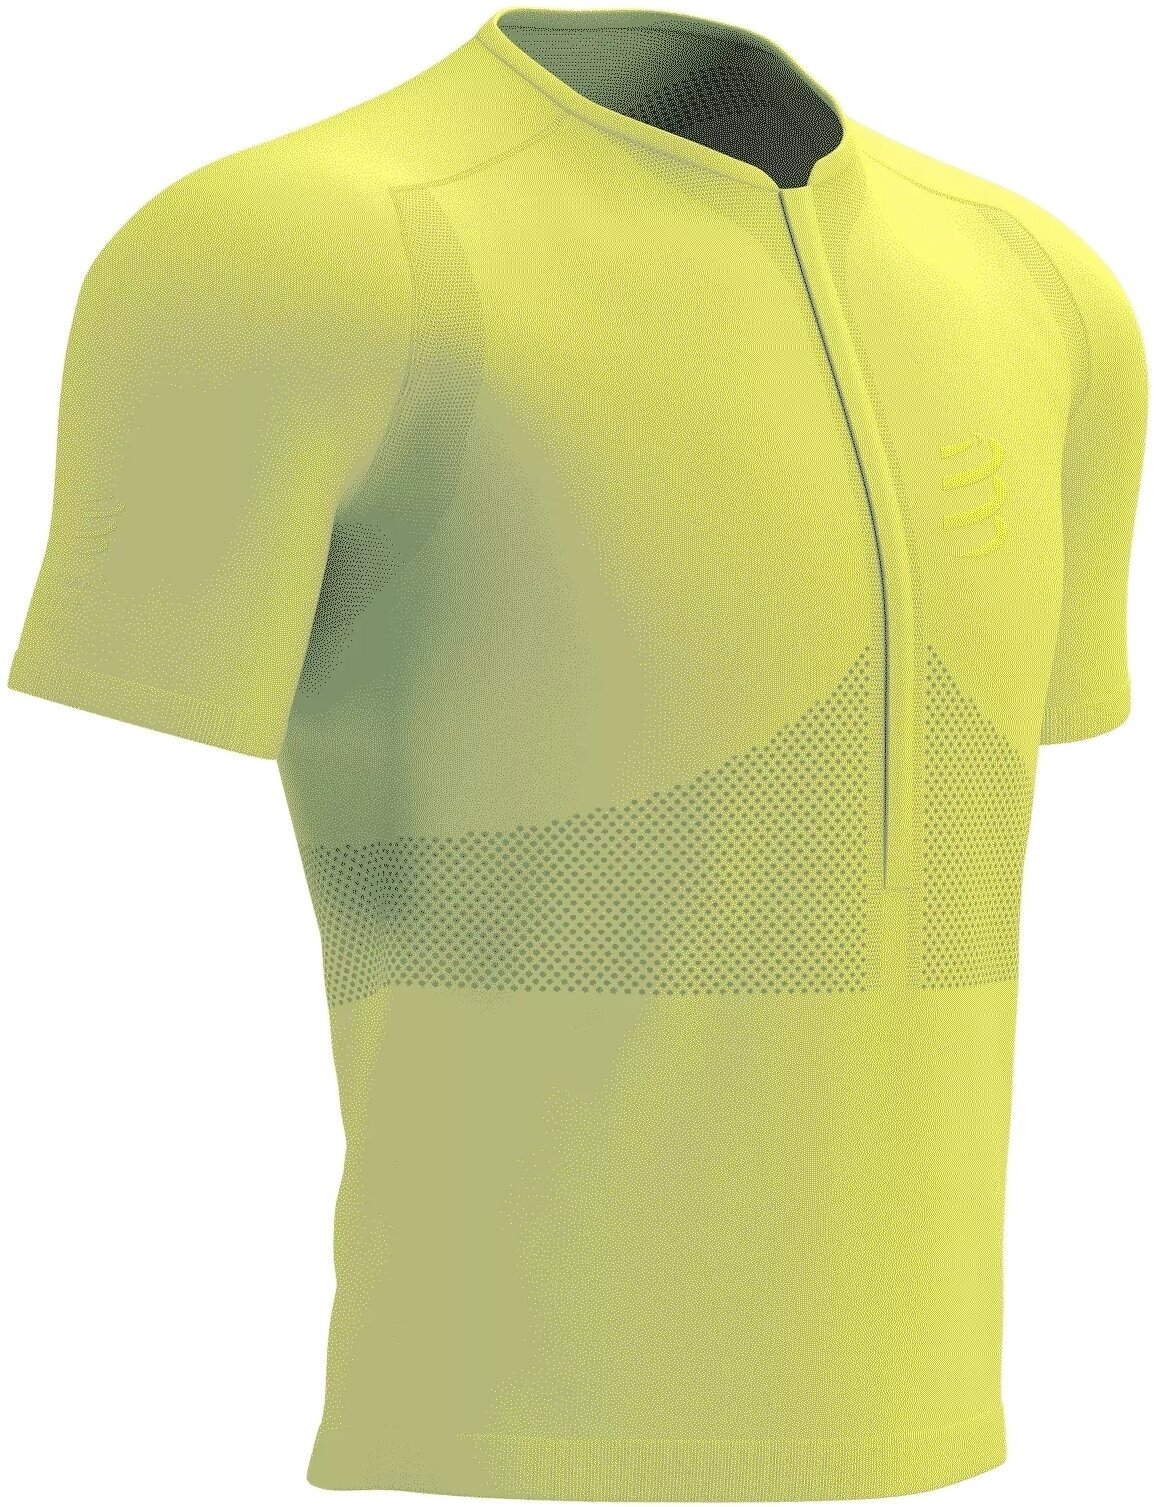 Chemise de course à manches courtes Compressport Trail Half-Zip Fitted SS Top Green Sheen/Safety Yellow L Chemise de course à manches courtes